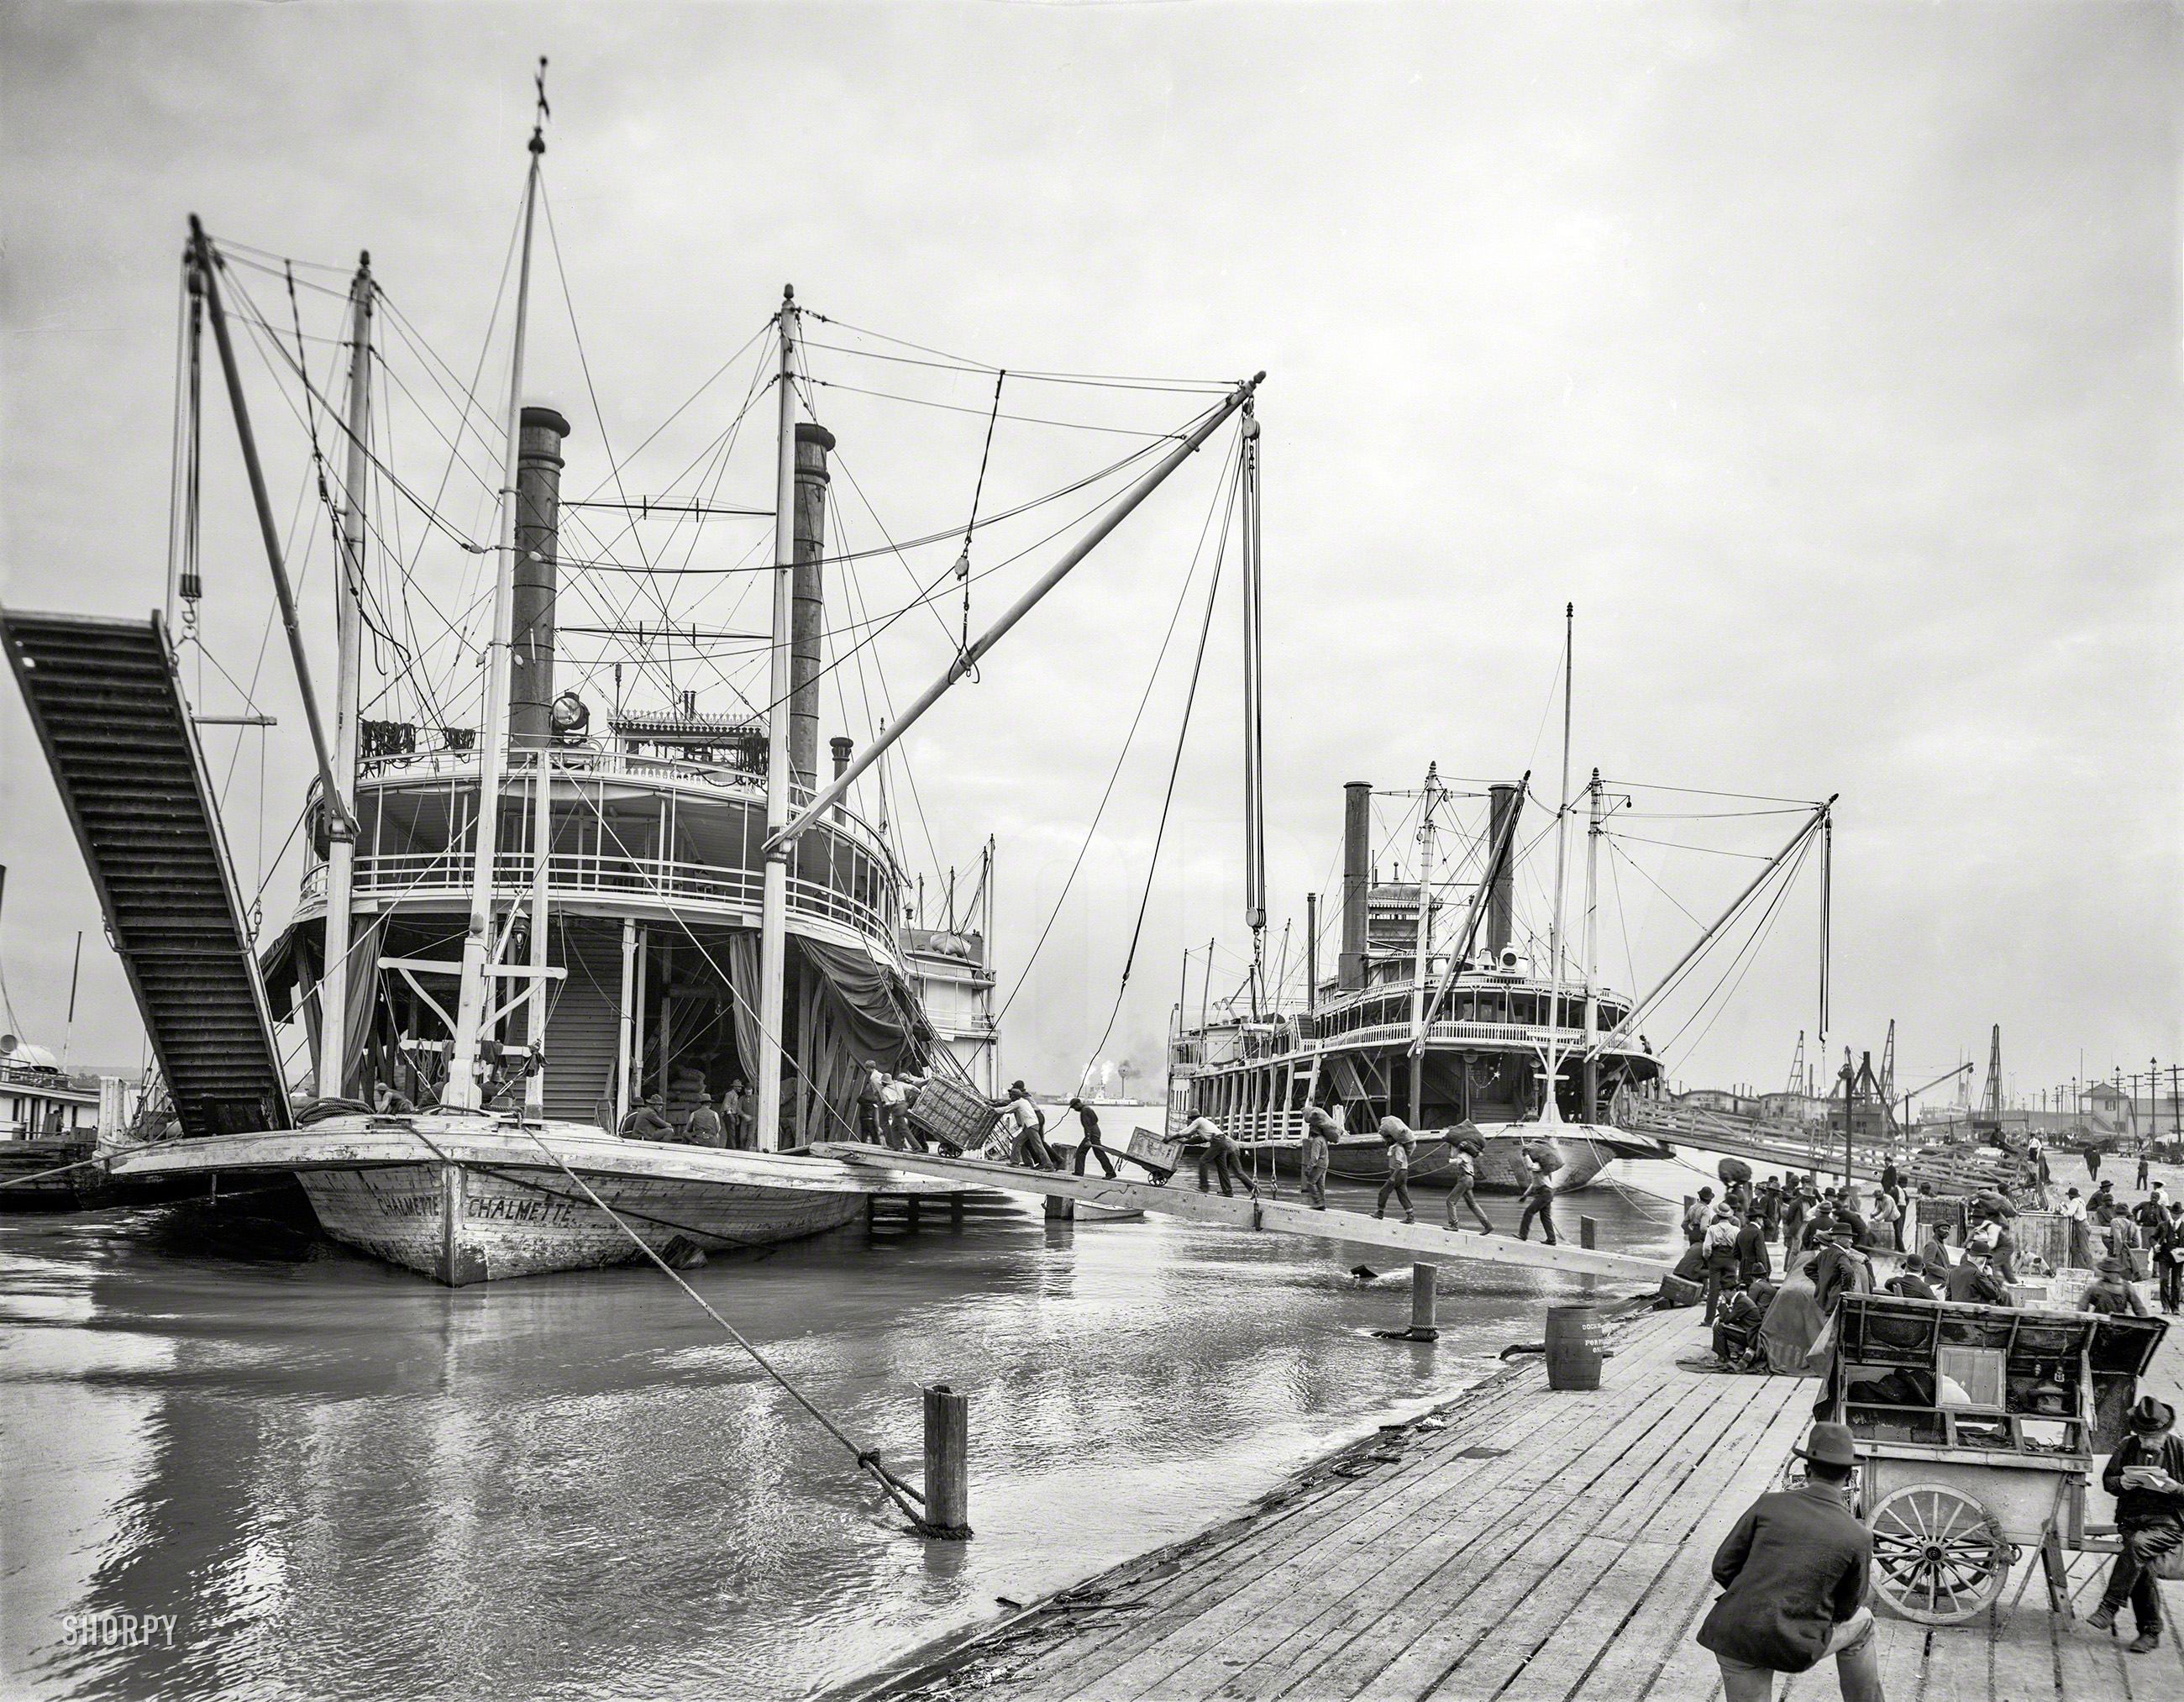 "Loading steamer Chalmette during high water, March 23, 1903, New Orleans." 8x10 inch dry plate glass negative, Detroit Publishing Company. View full size.